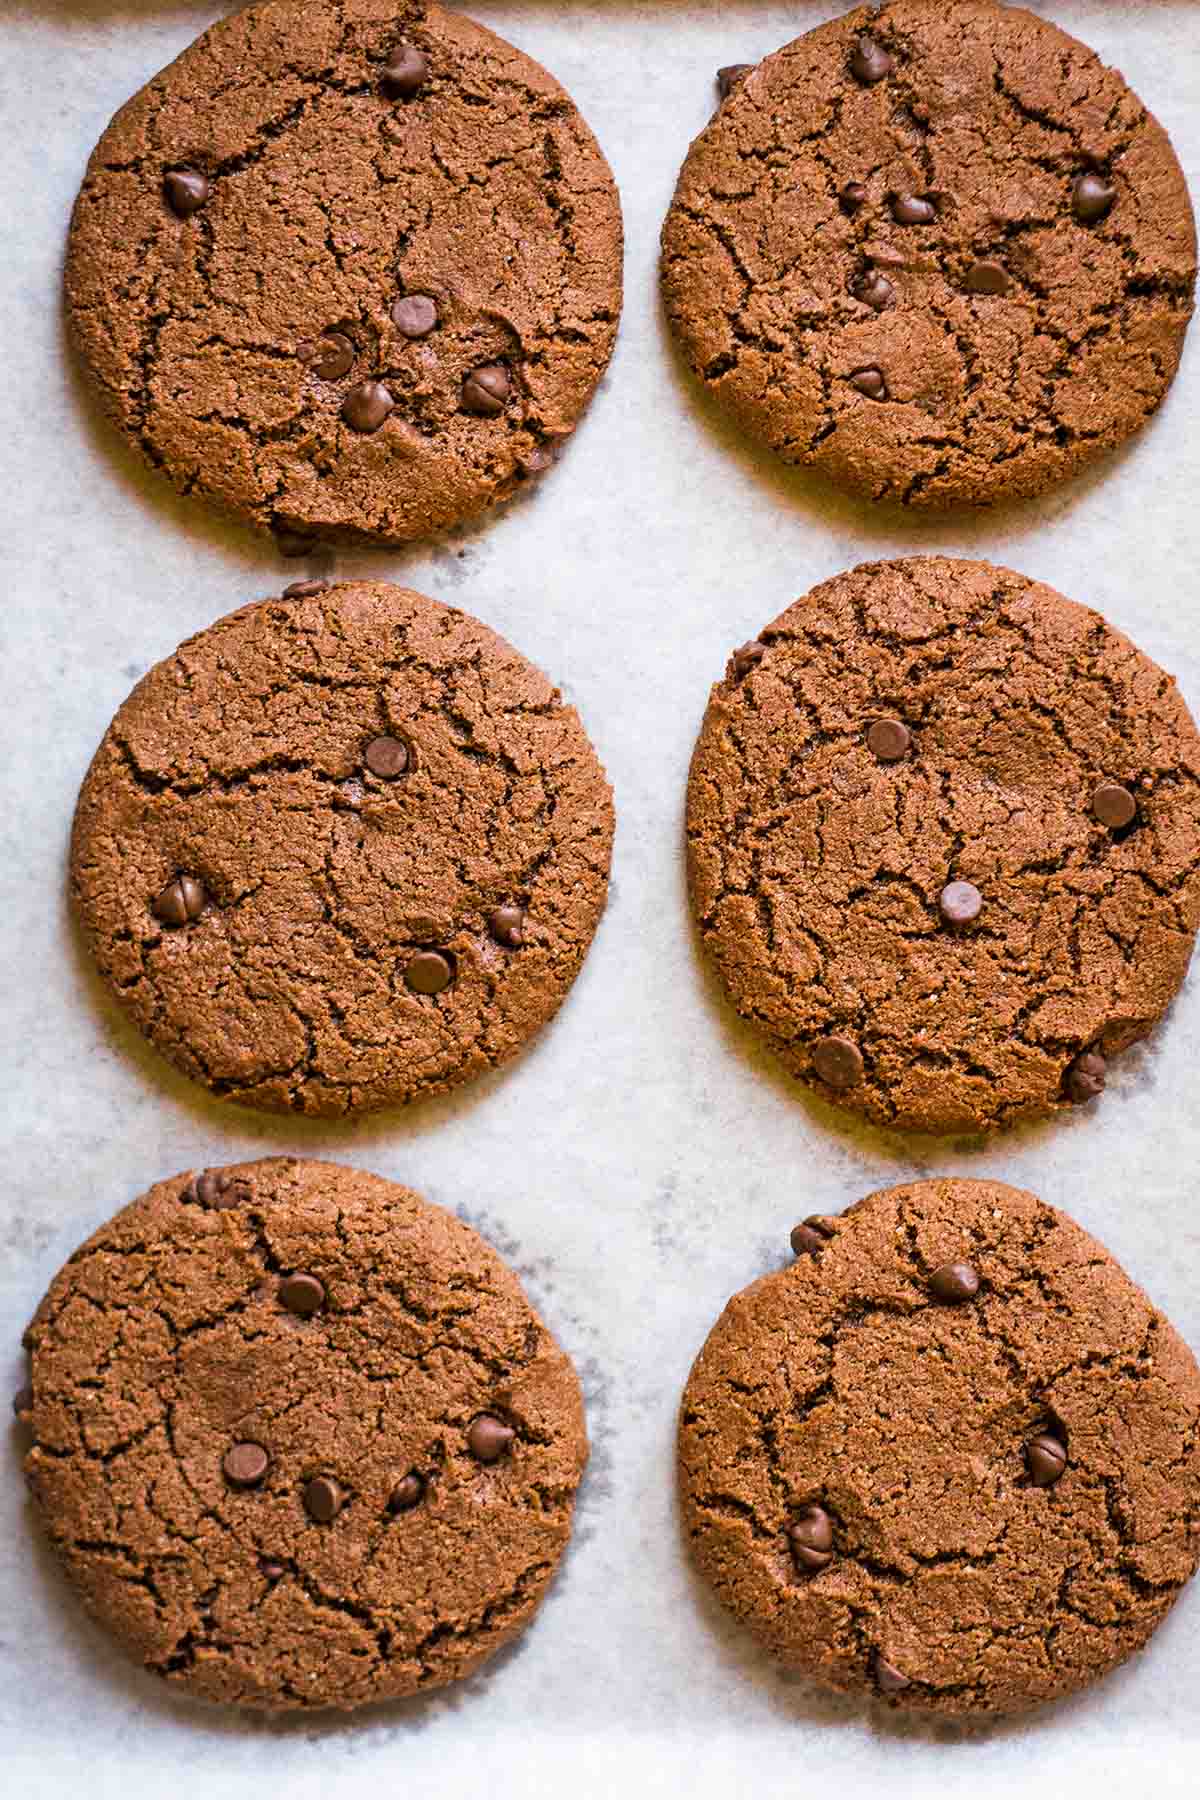 Coconut flour chocolate cookies on a baking sheet